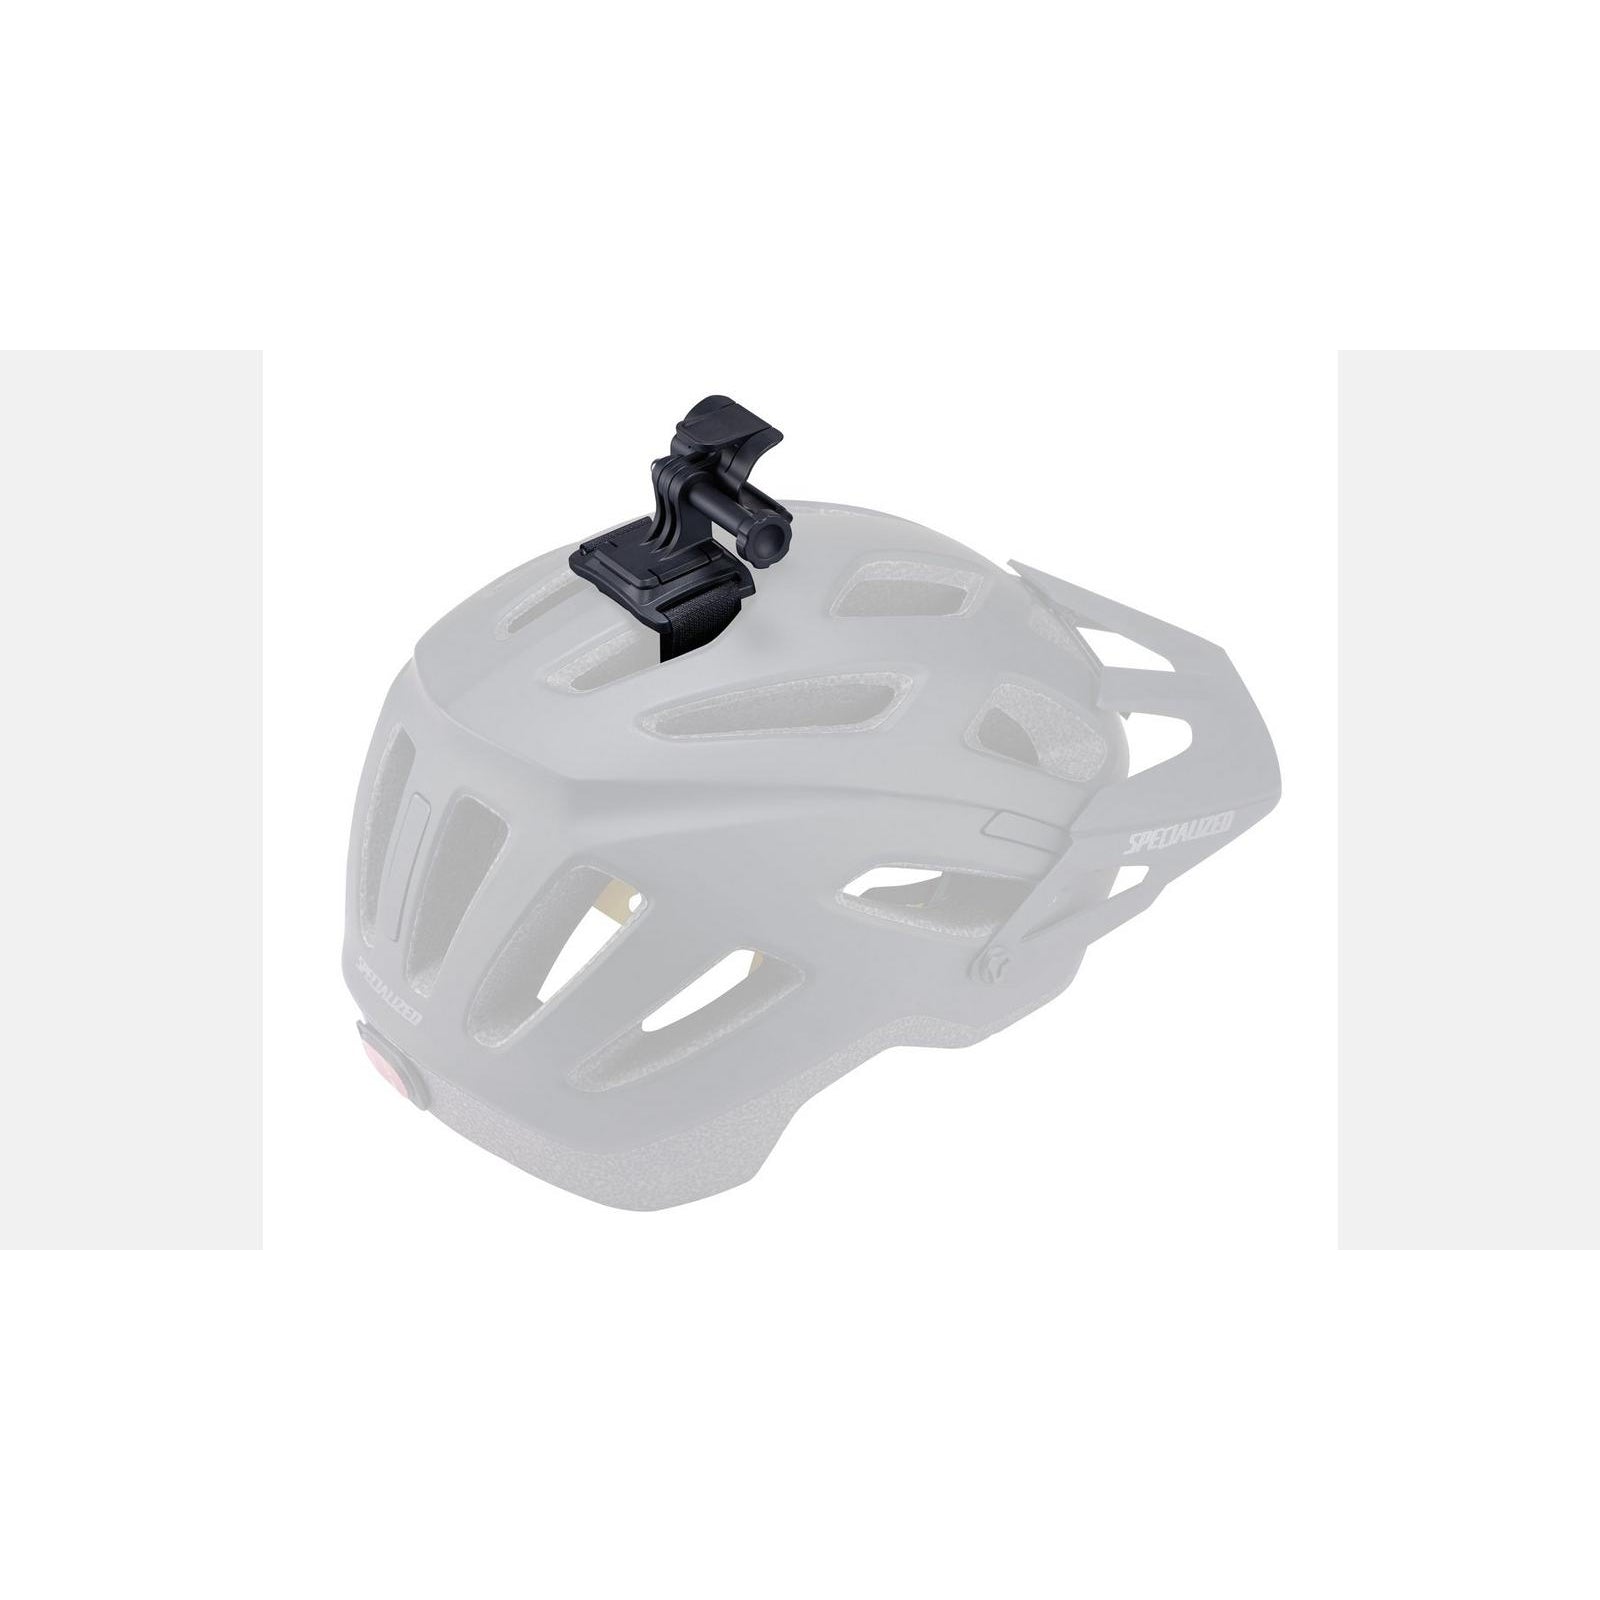 Specialized Flux™ 900/1200 Headlight Helmet Mount - Accessories - Bicycle Warehouse